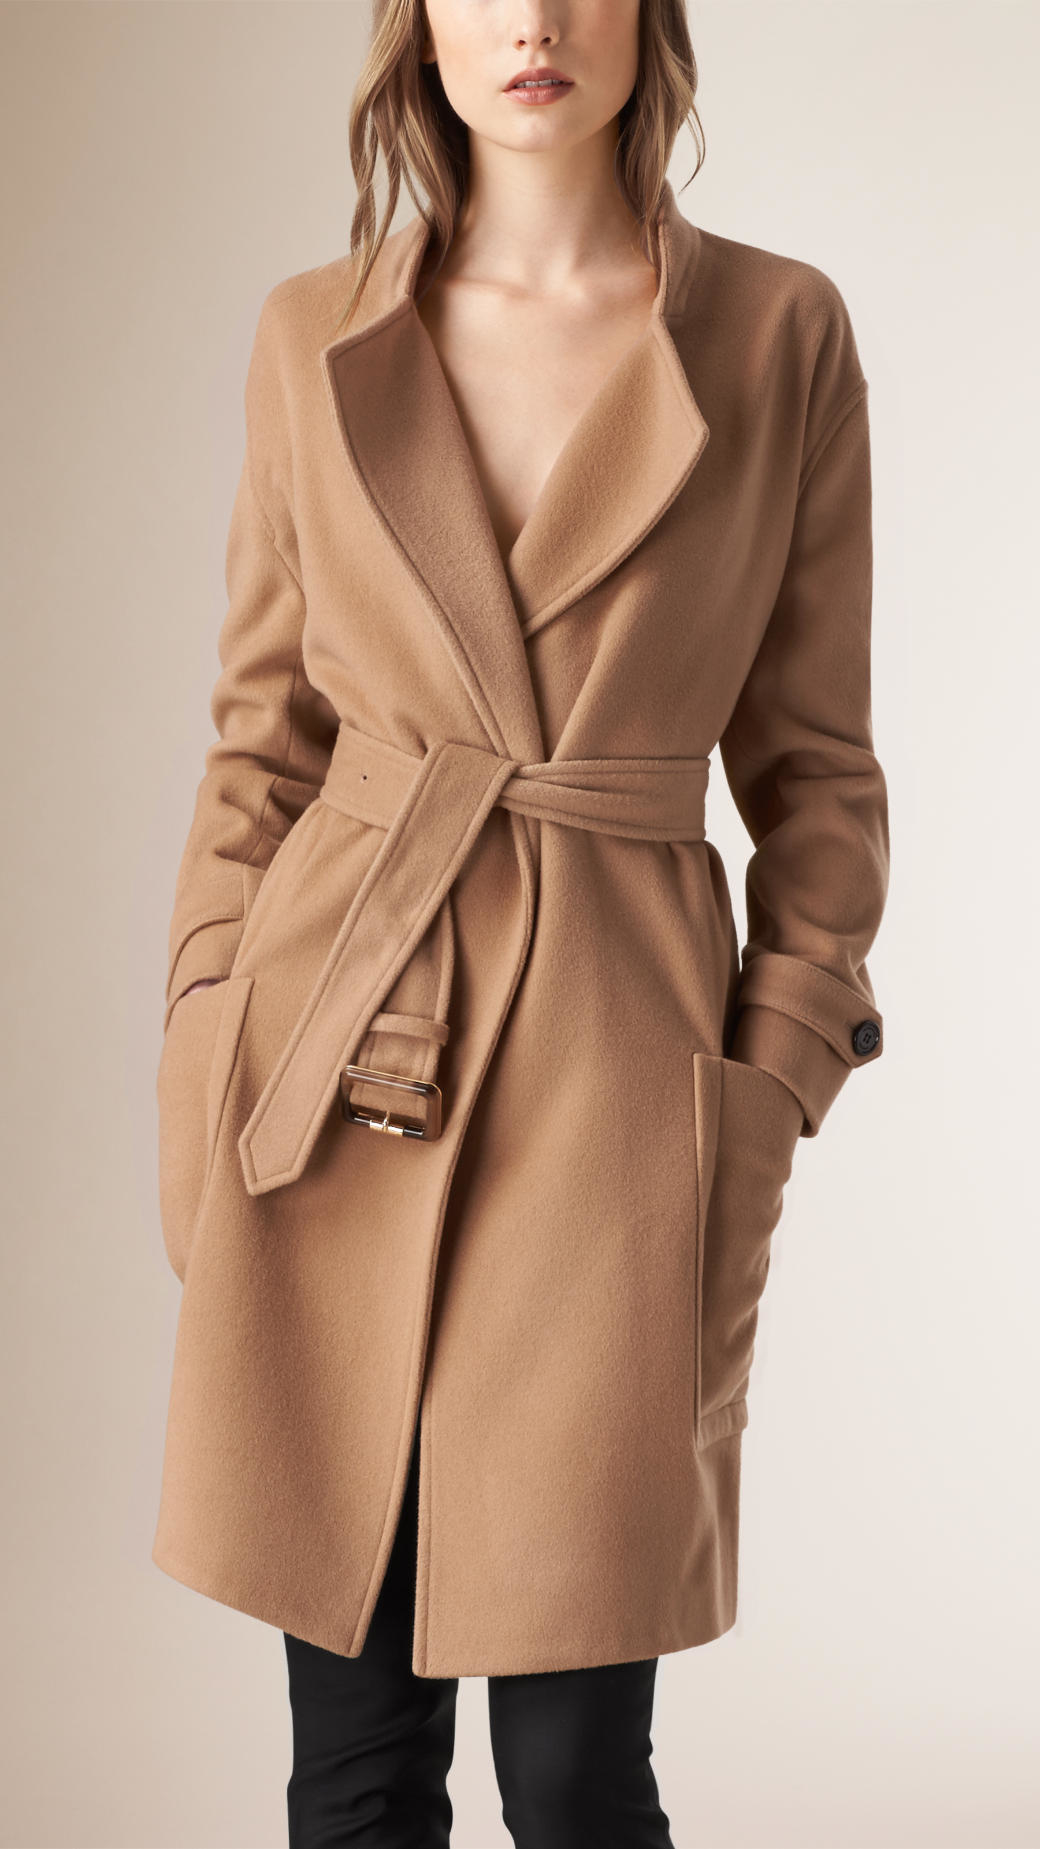 Burberry Relaxed-Fit Wool-Cashmere Coat in Natural | Lyst